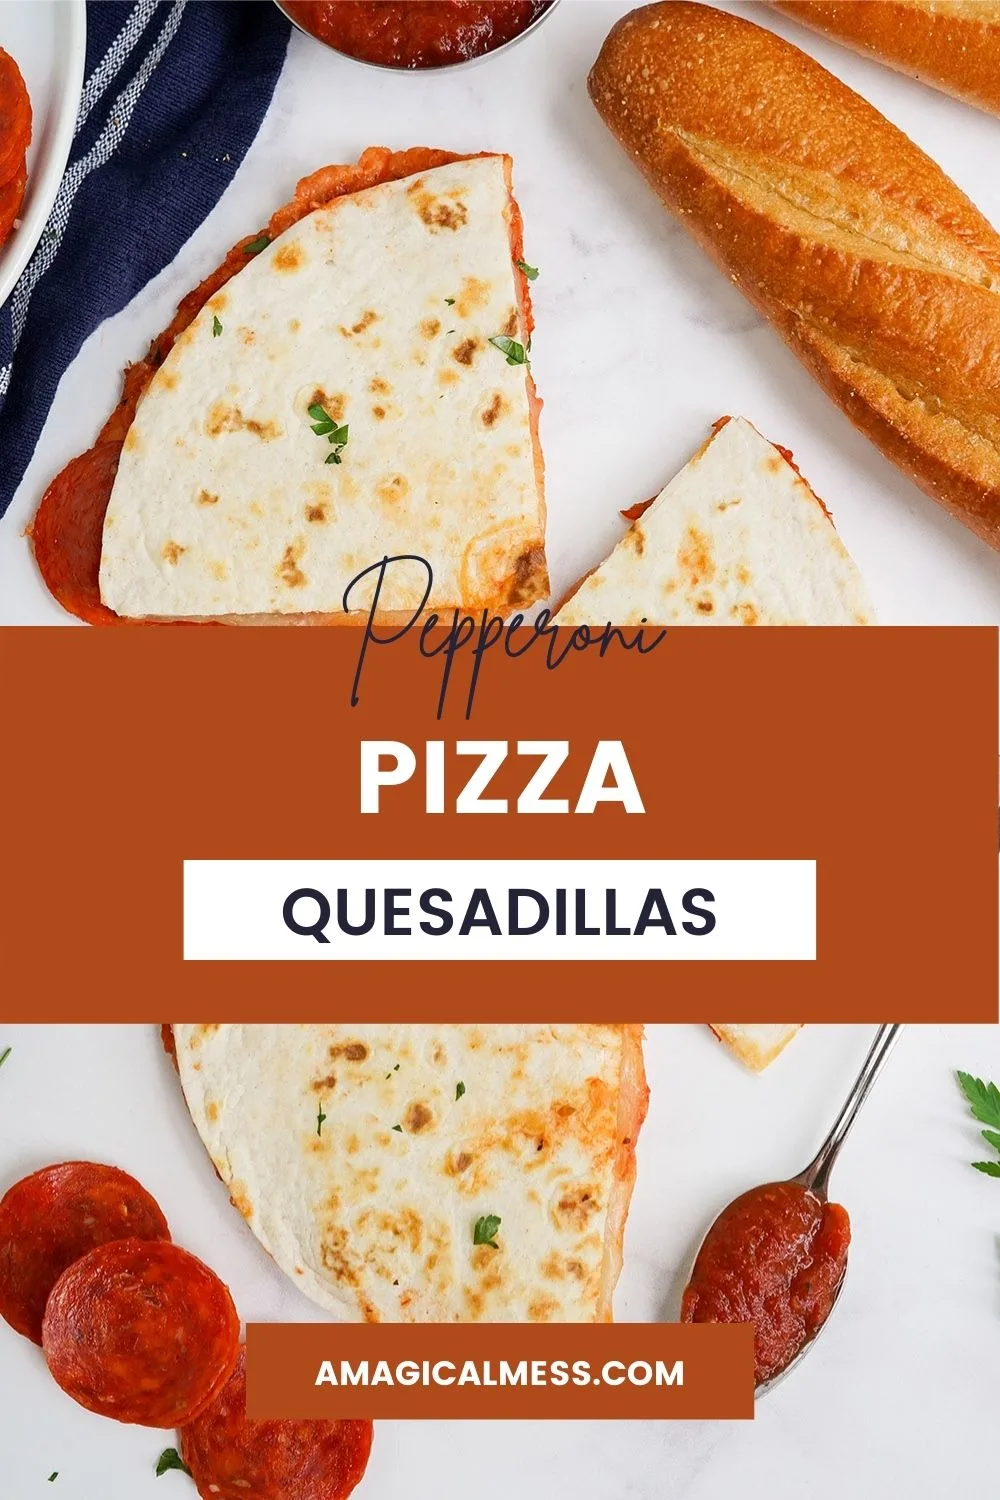 Overhead image of pizza quesadillas with bread, sauce, and pepperoni on the table.